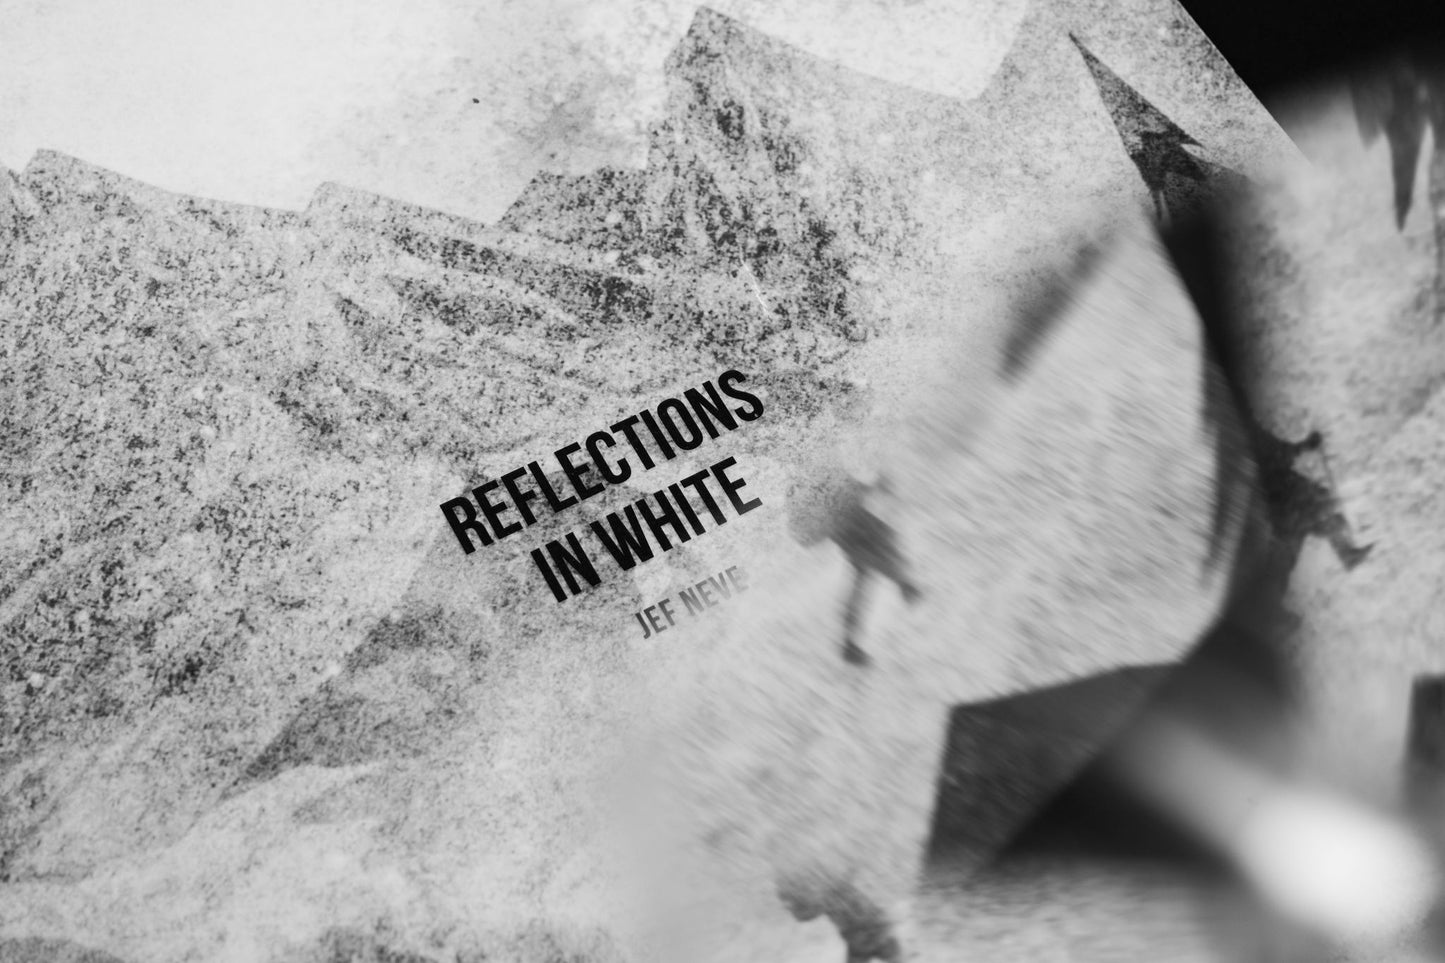 Reflections in White